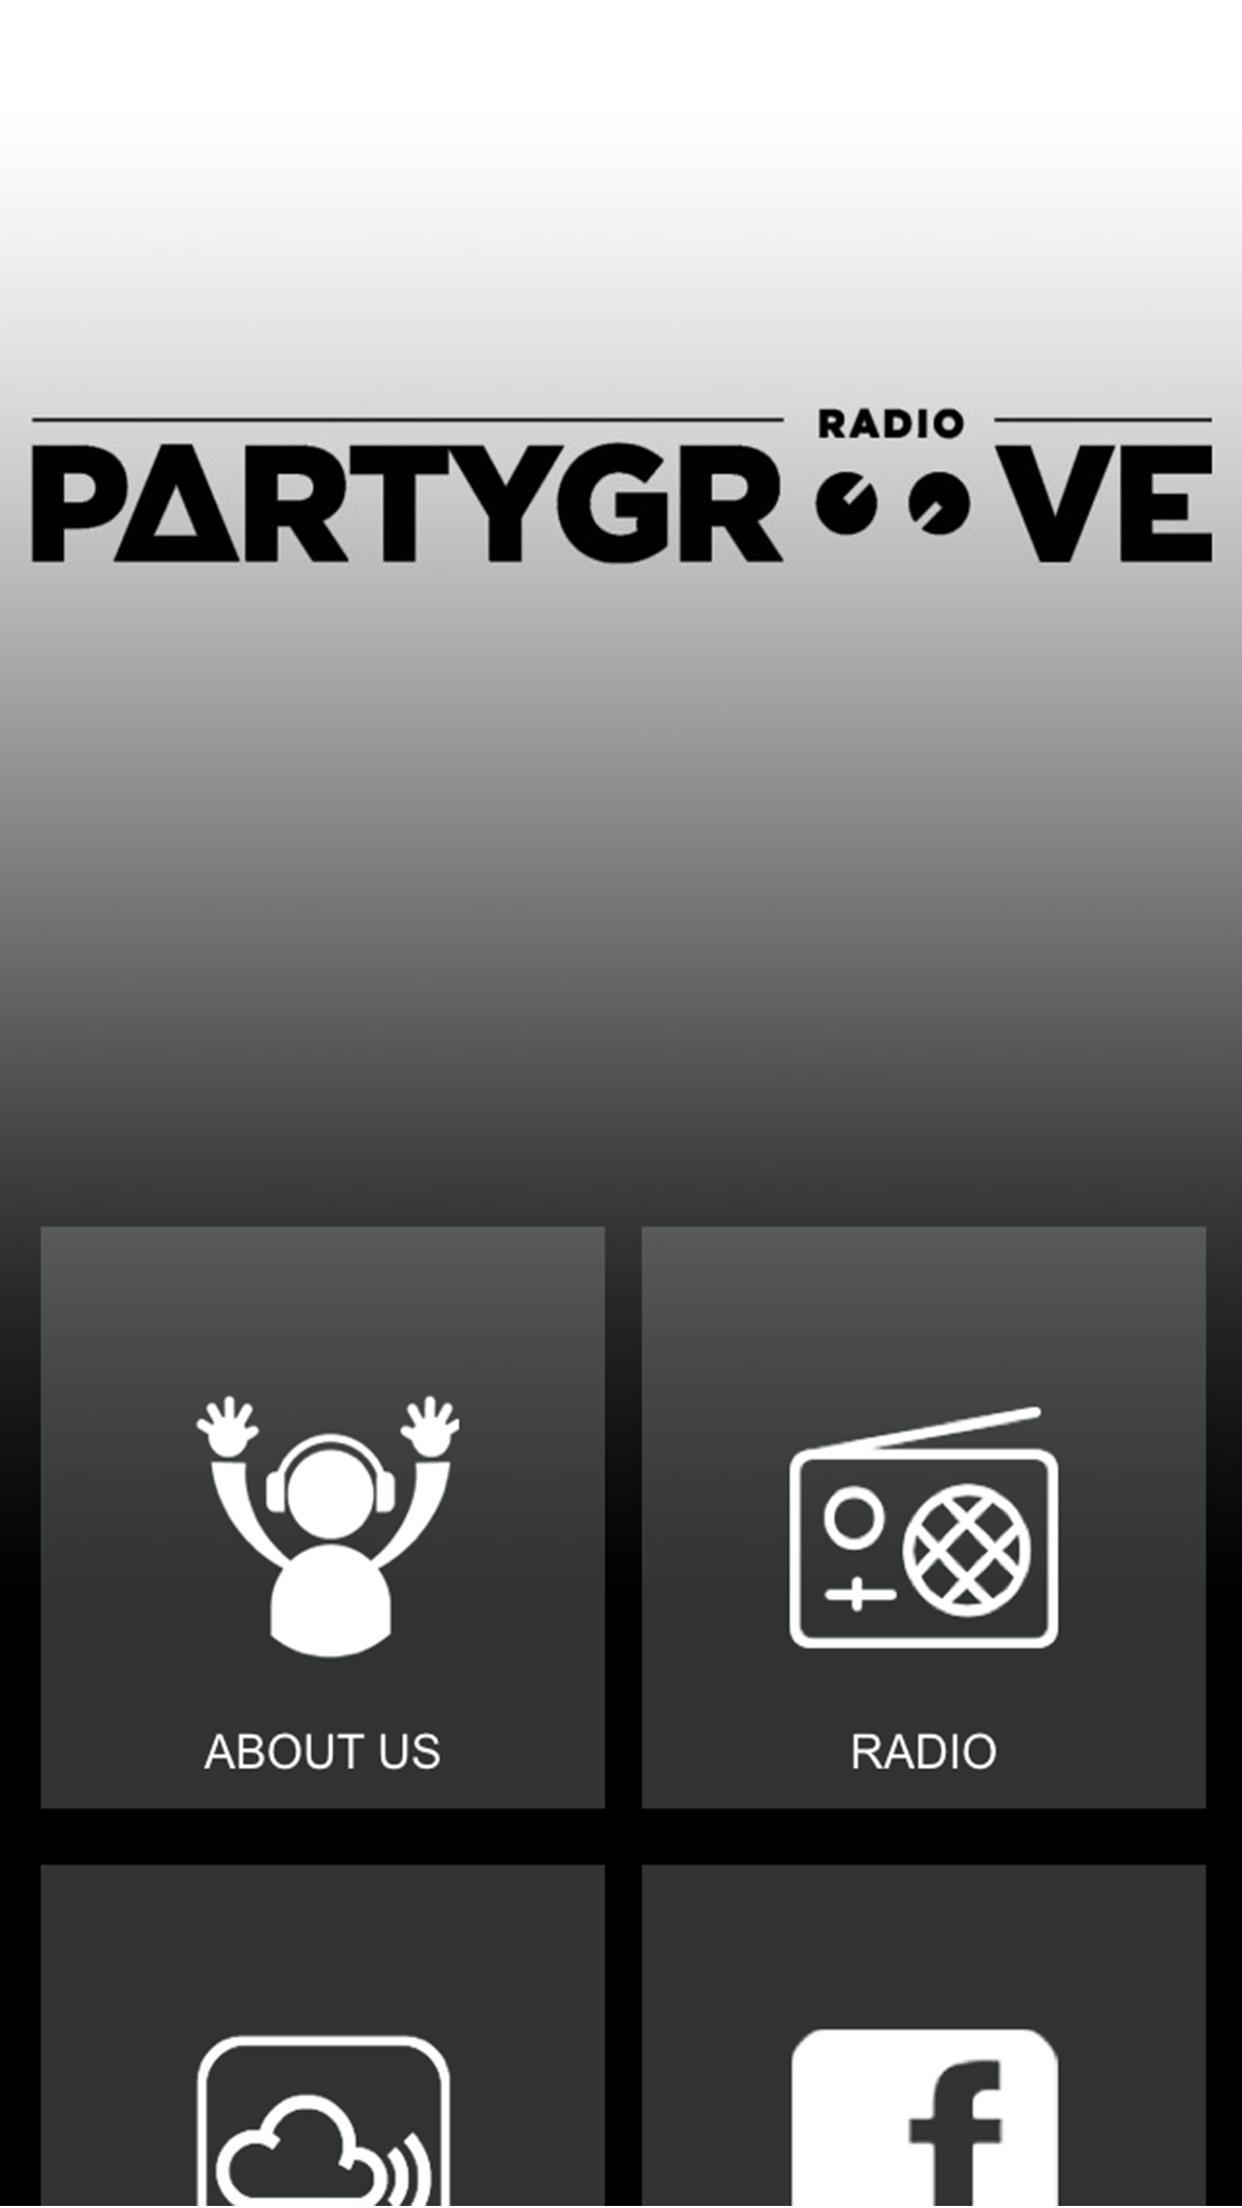 Party Groove Radio for Android - APK Download